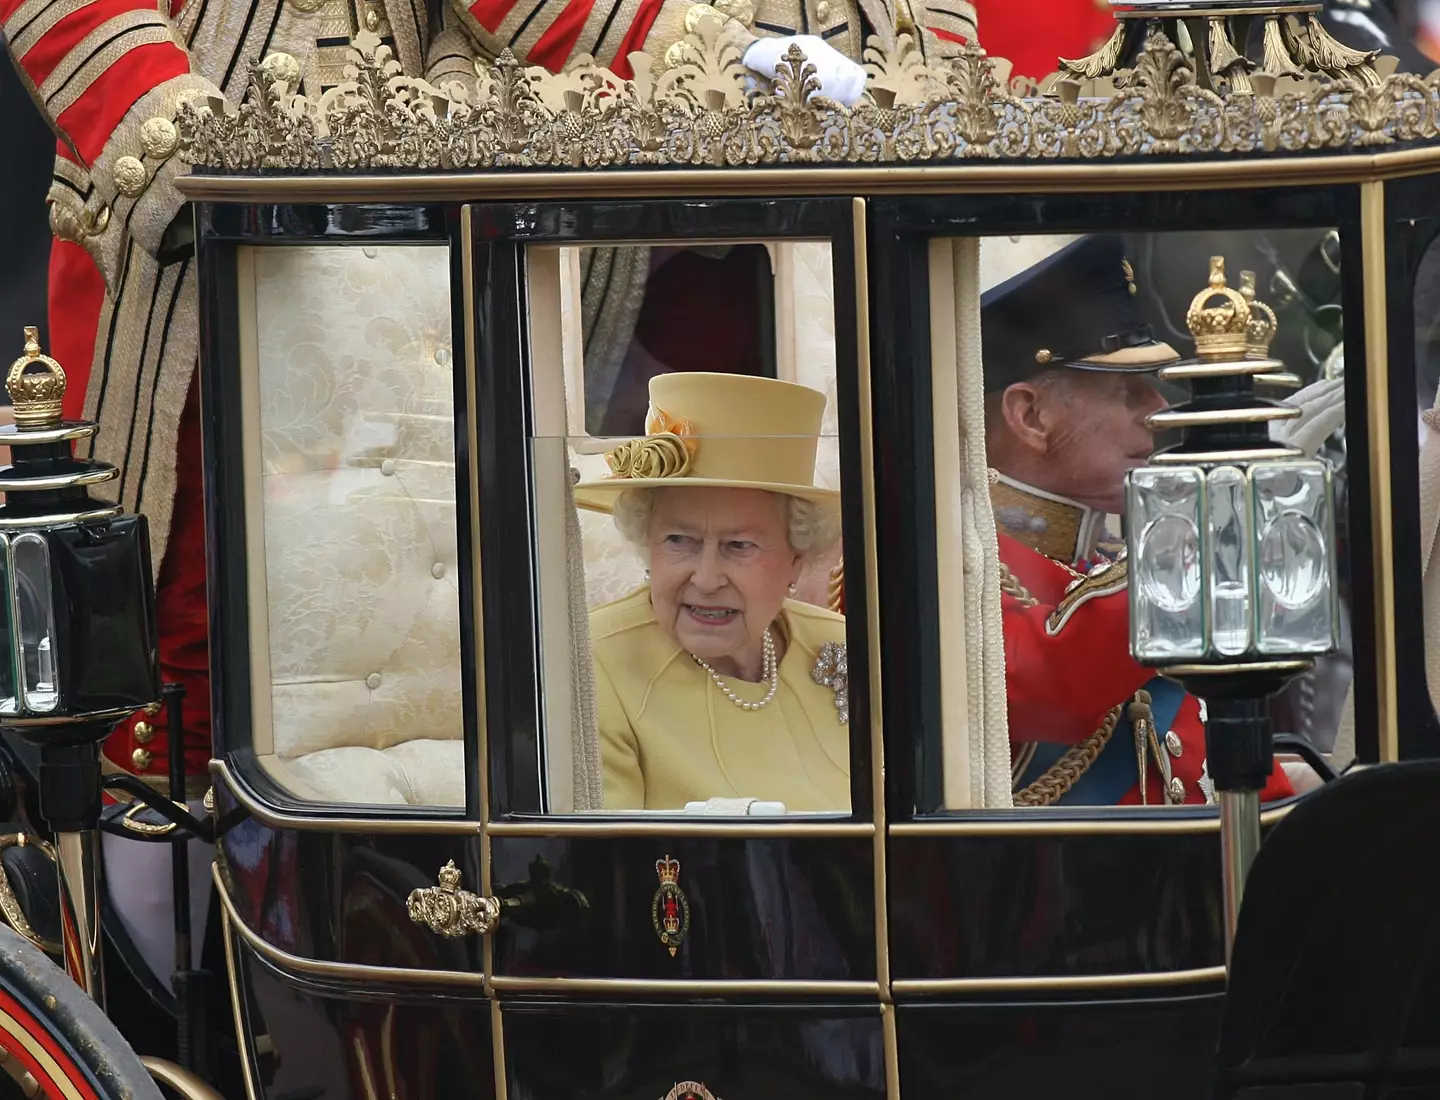 Queen Elizabeth II's reign spanned 70 years in which the world changed so much.